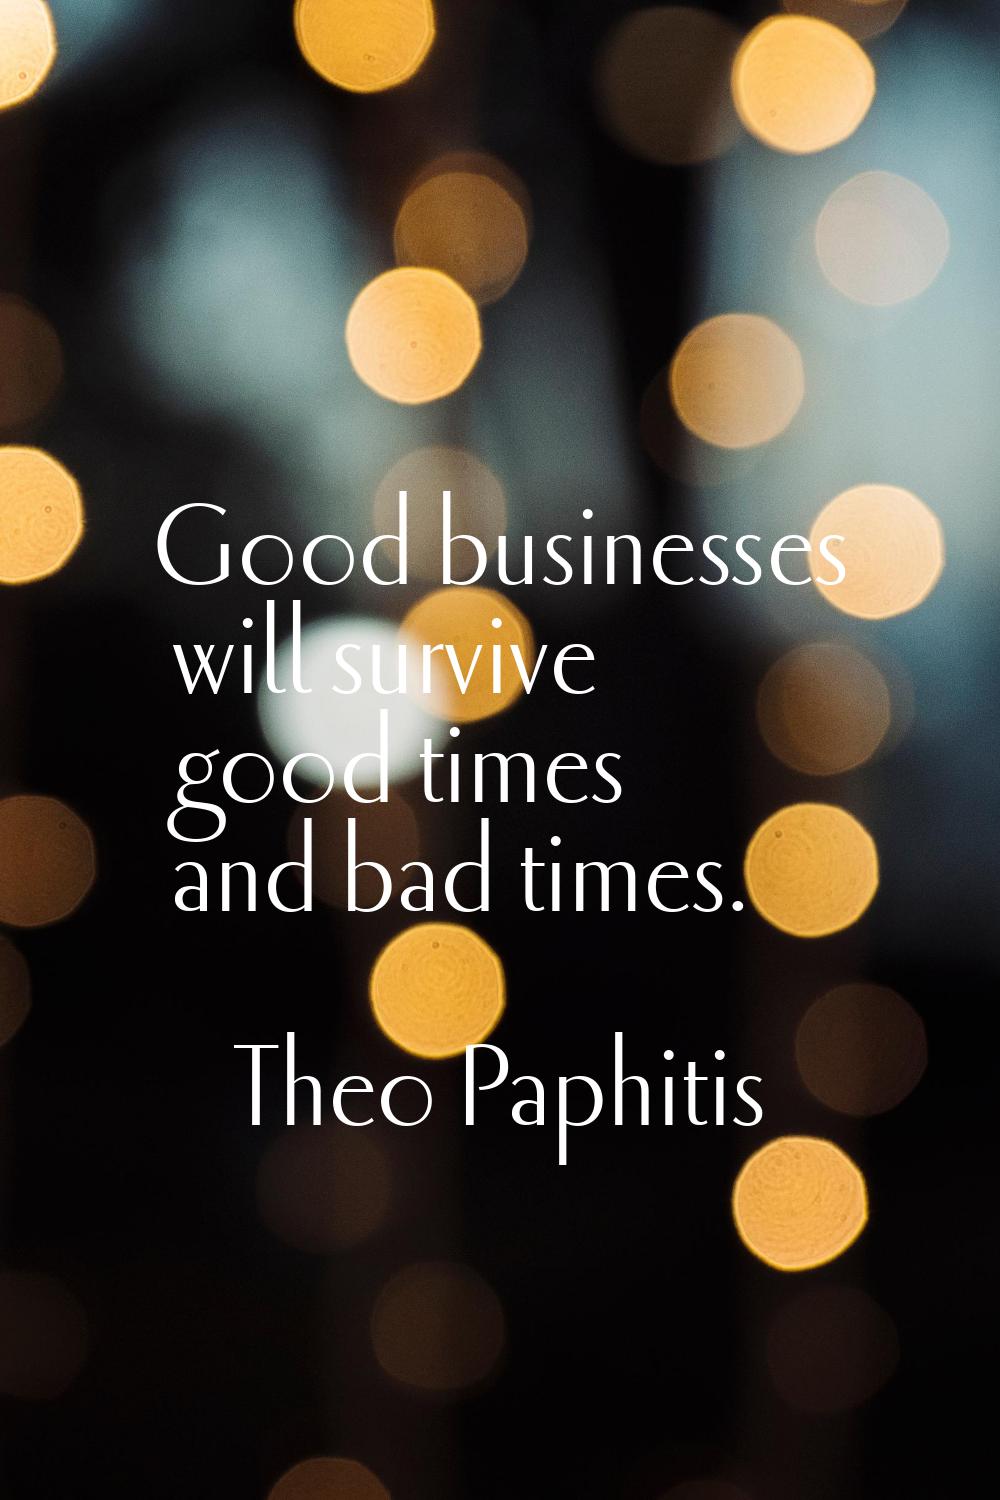 Good businesses will survive good times and bad times.